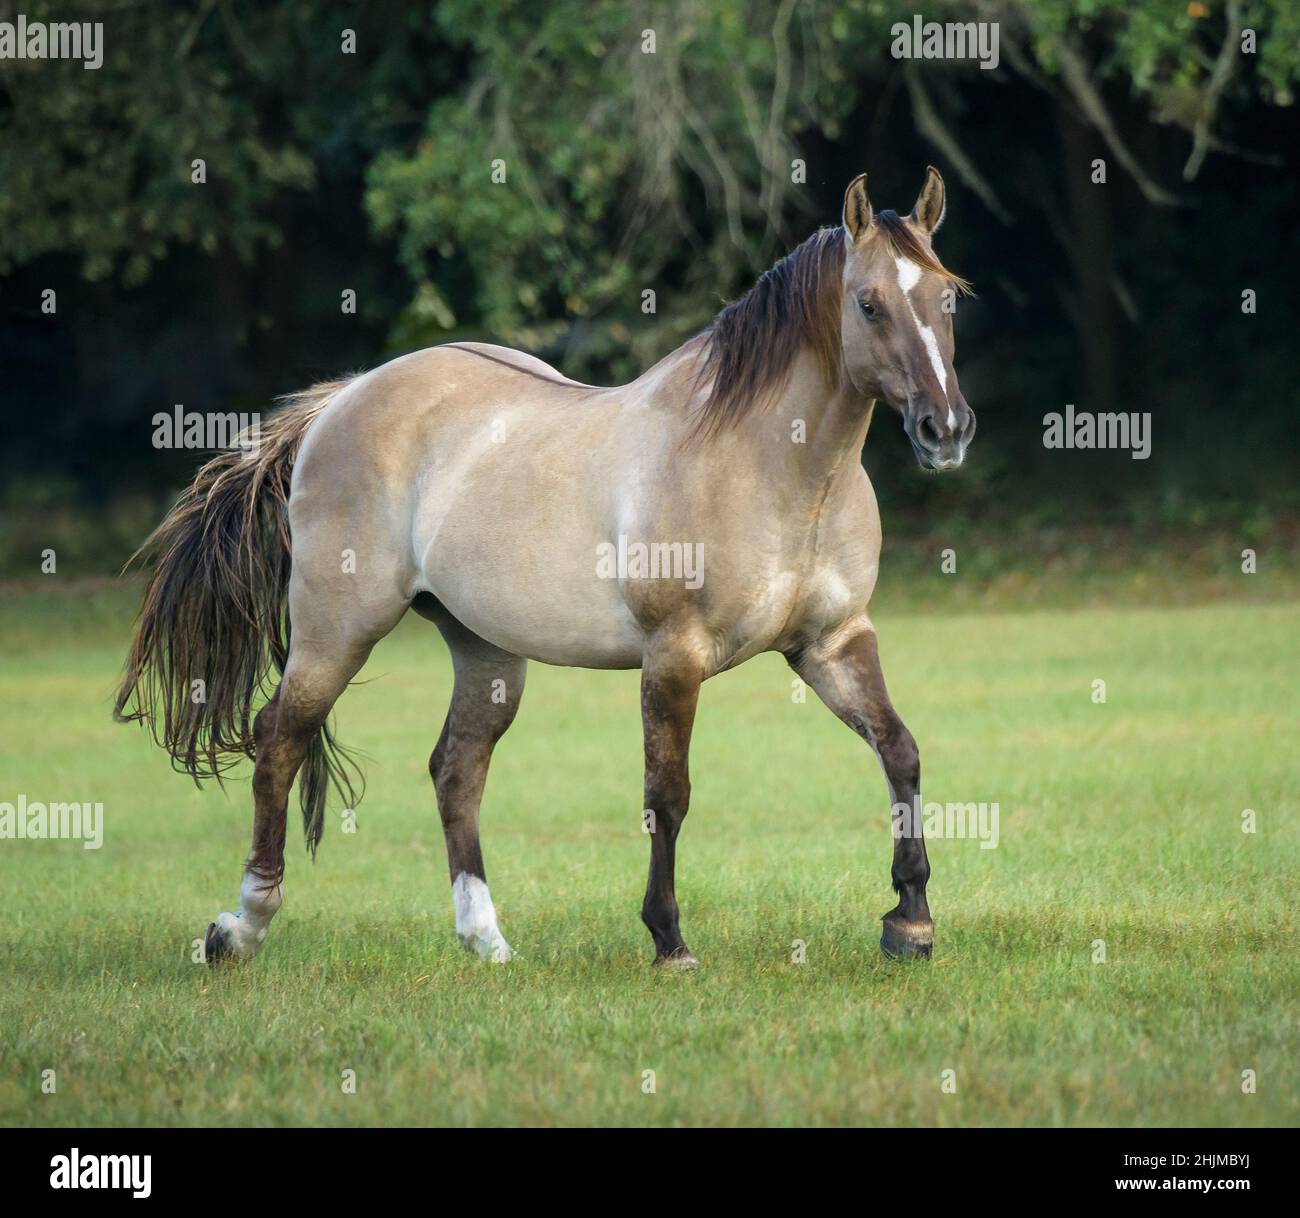 Dun colored horse running in grass paddock Stock Photo